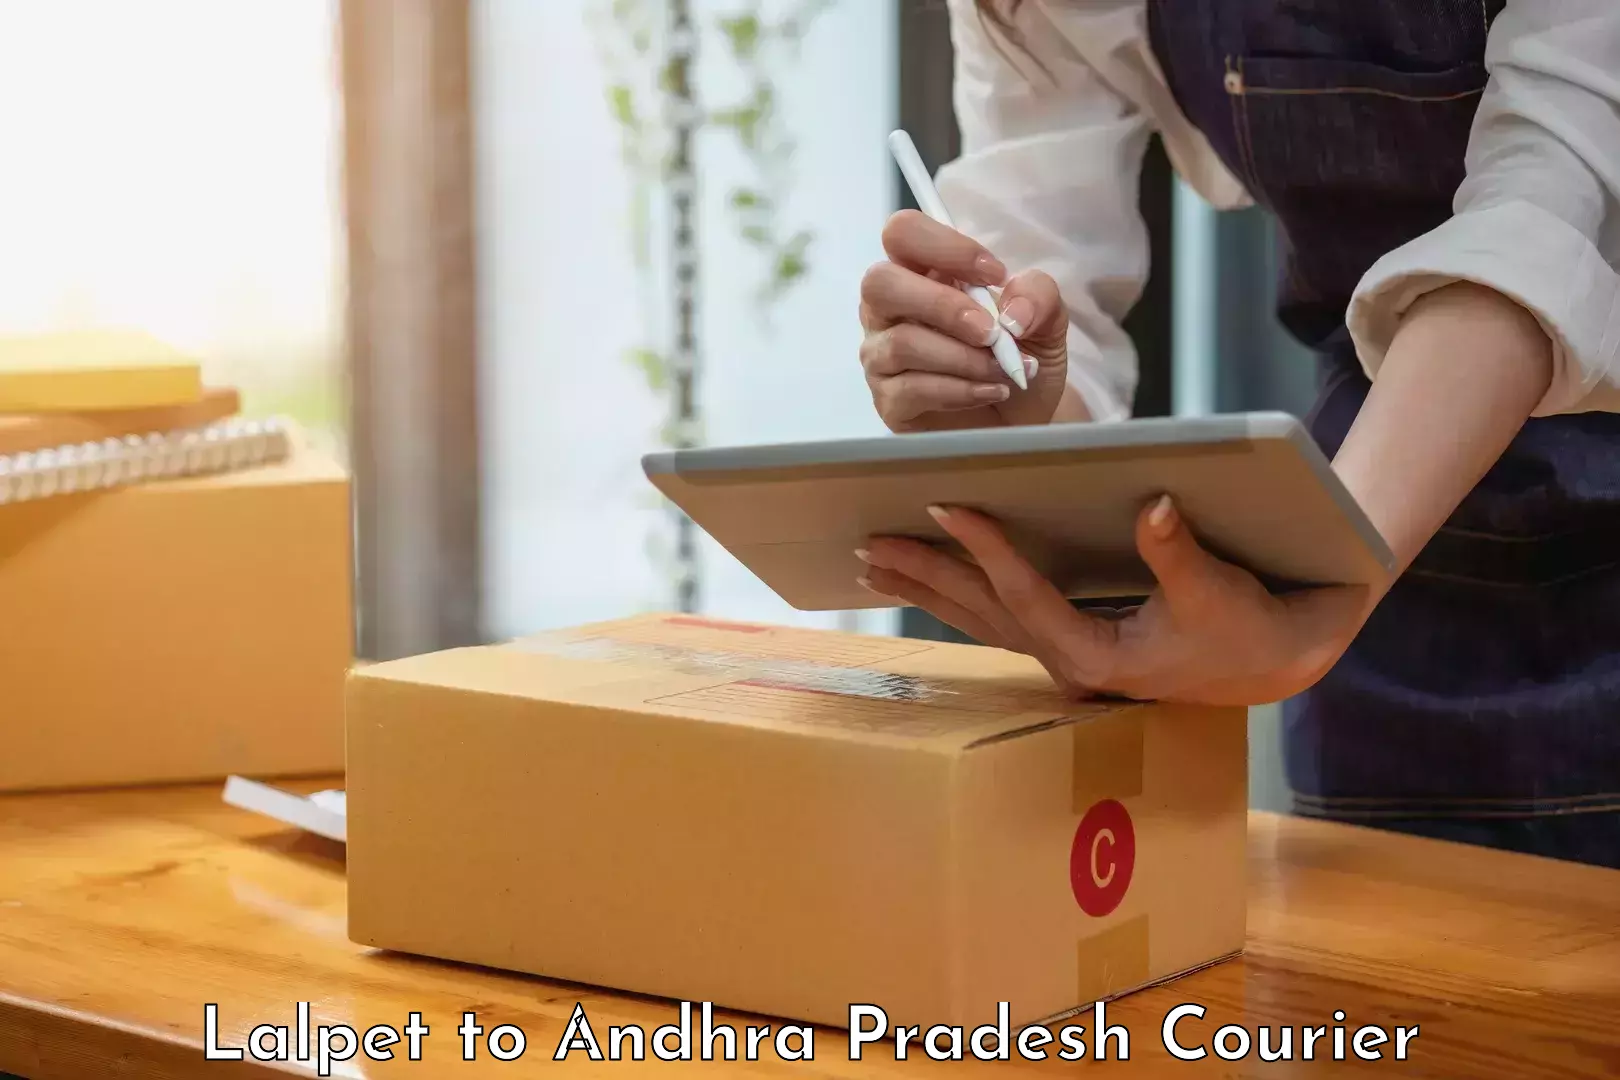 Round-the-clock parcel delivery Lalpet to Mangalagiri